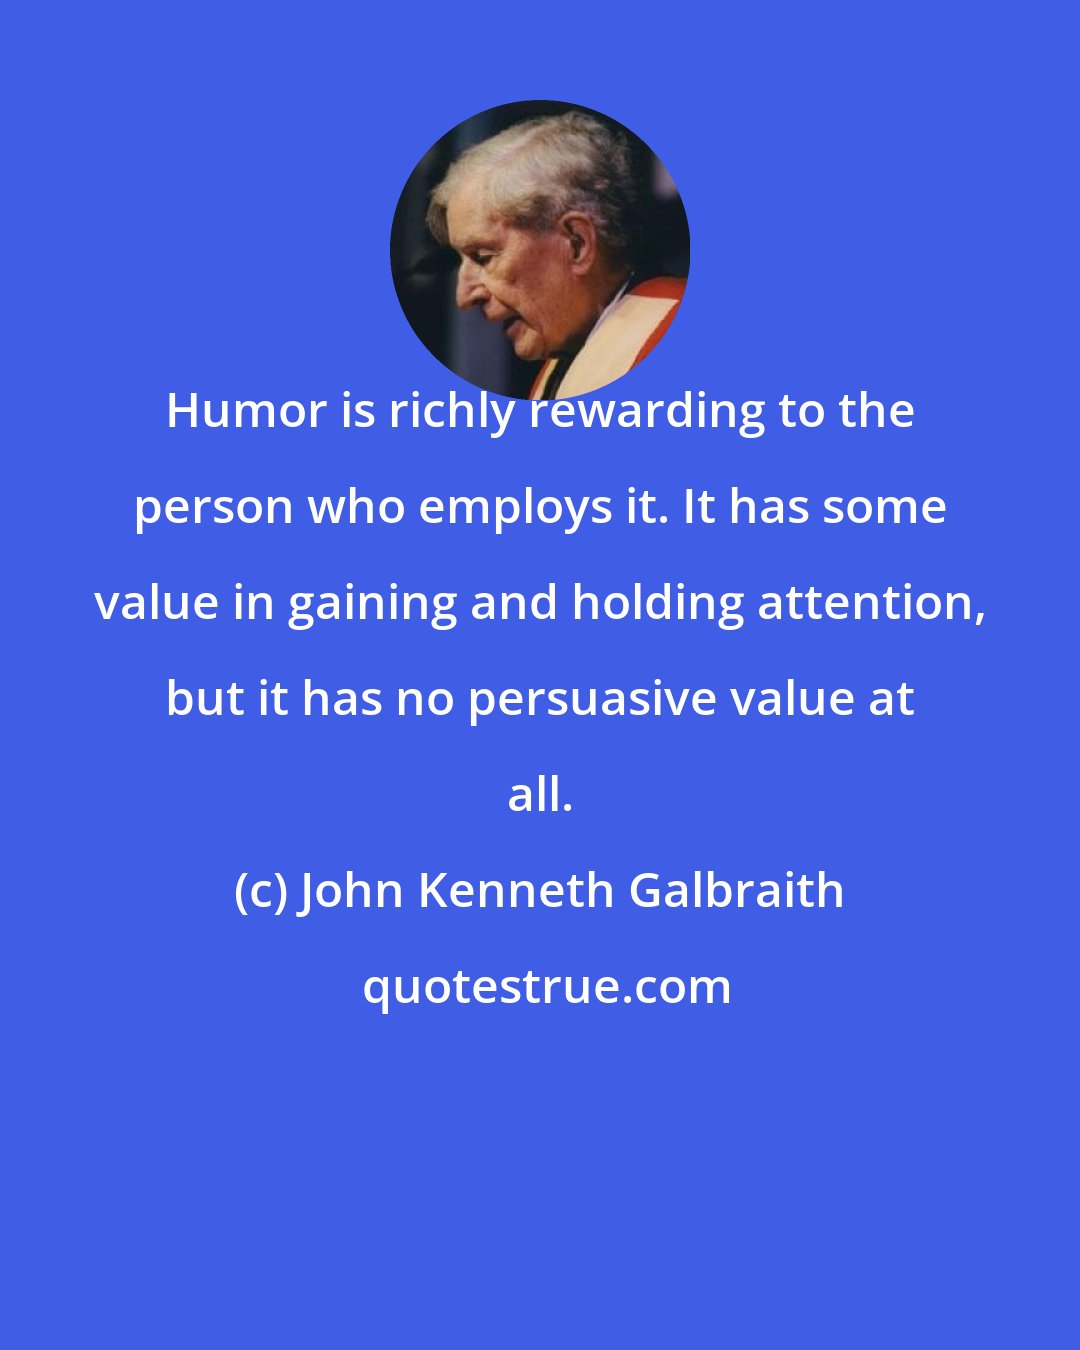 John Kenneth Galbraith: Humor is richly rewarding to the person who employs it. It has some value in gaining and holding attention, but it has no persuasive value at all.